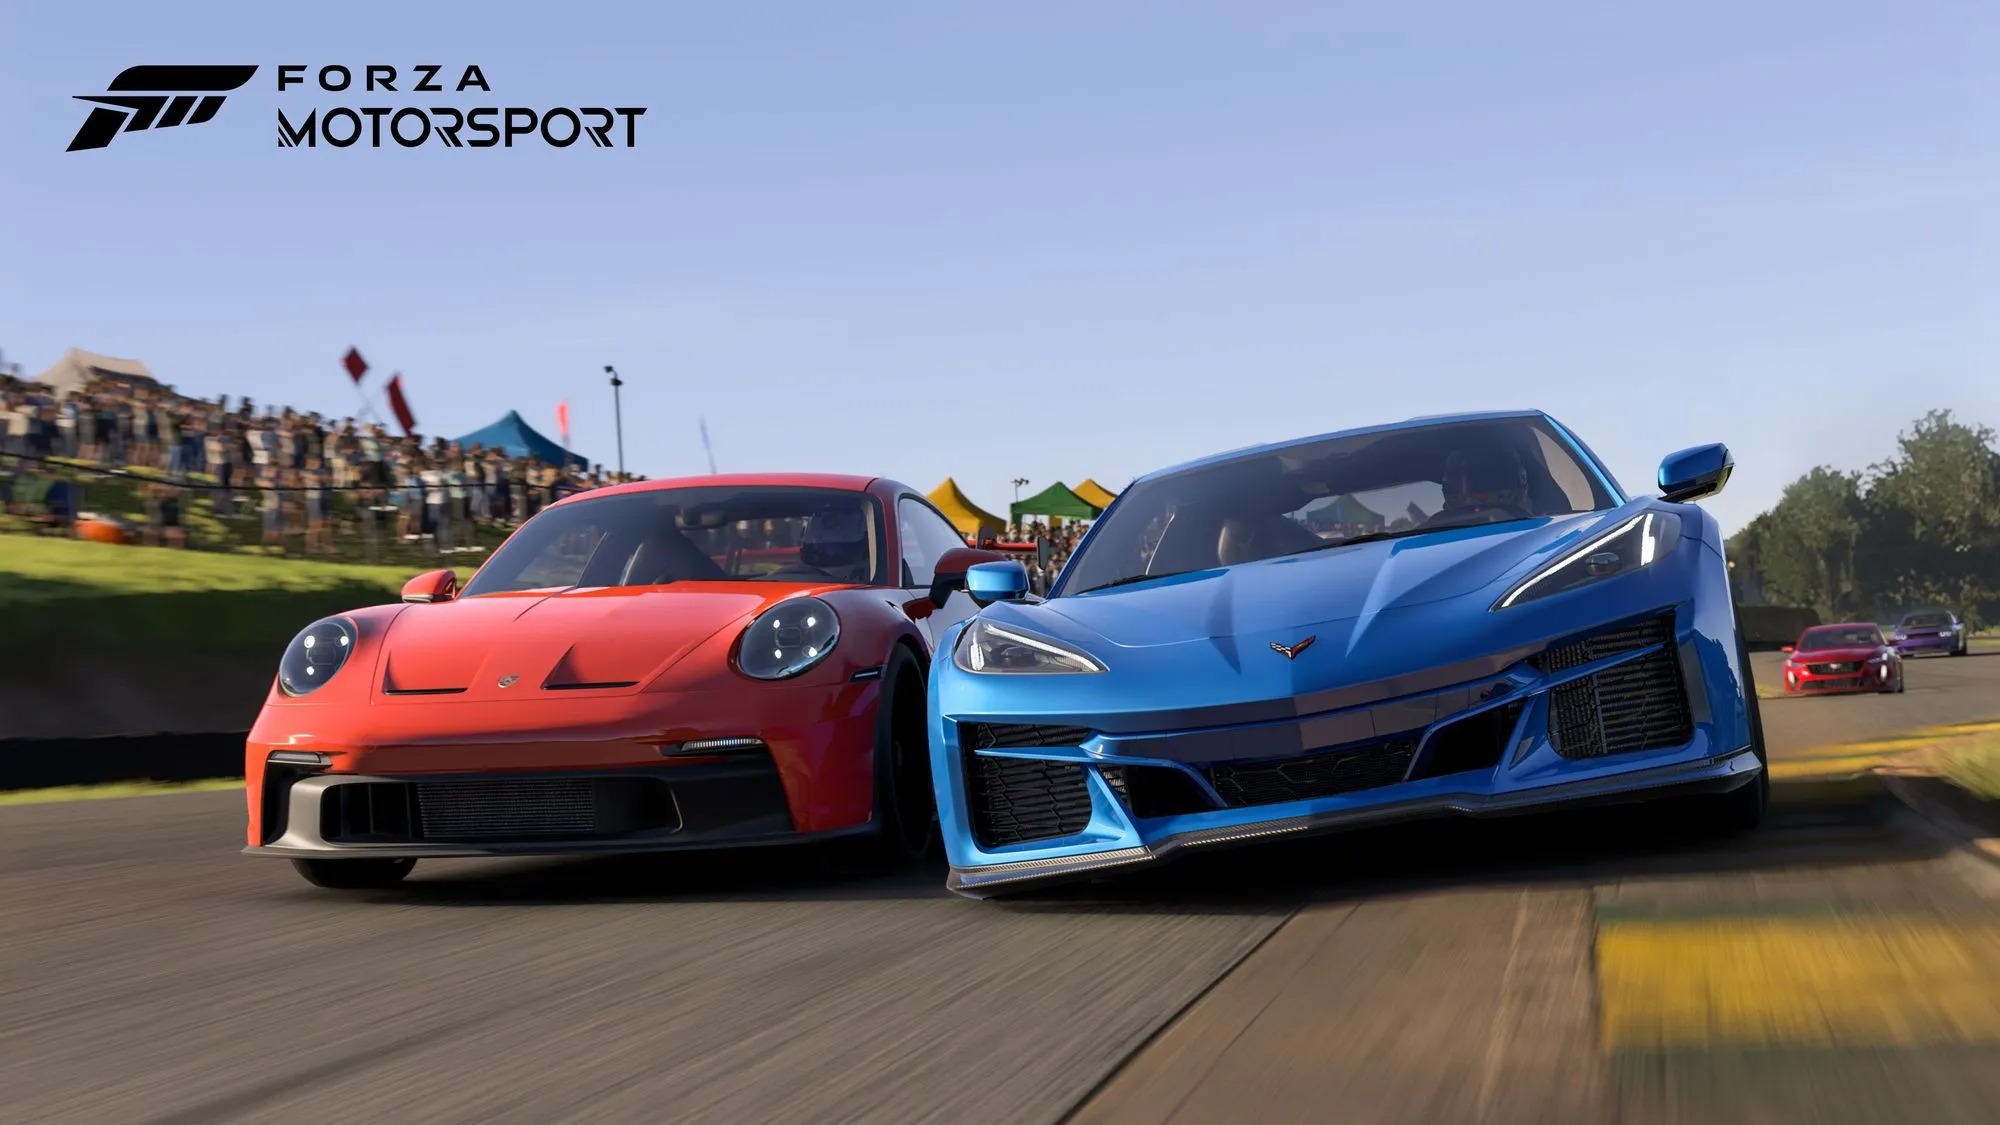 Forza Motorsport Shows Off its Opening Races With New Trailer